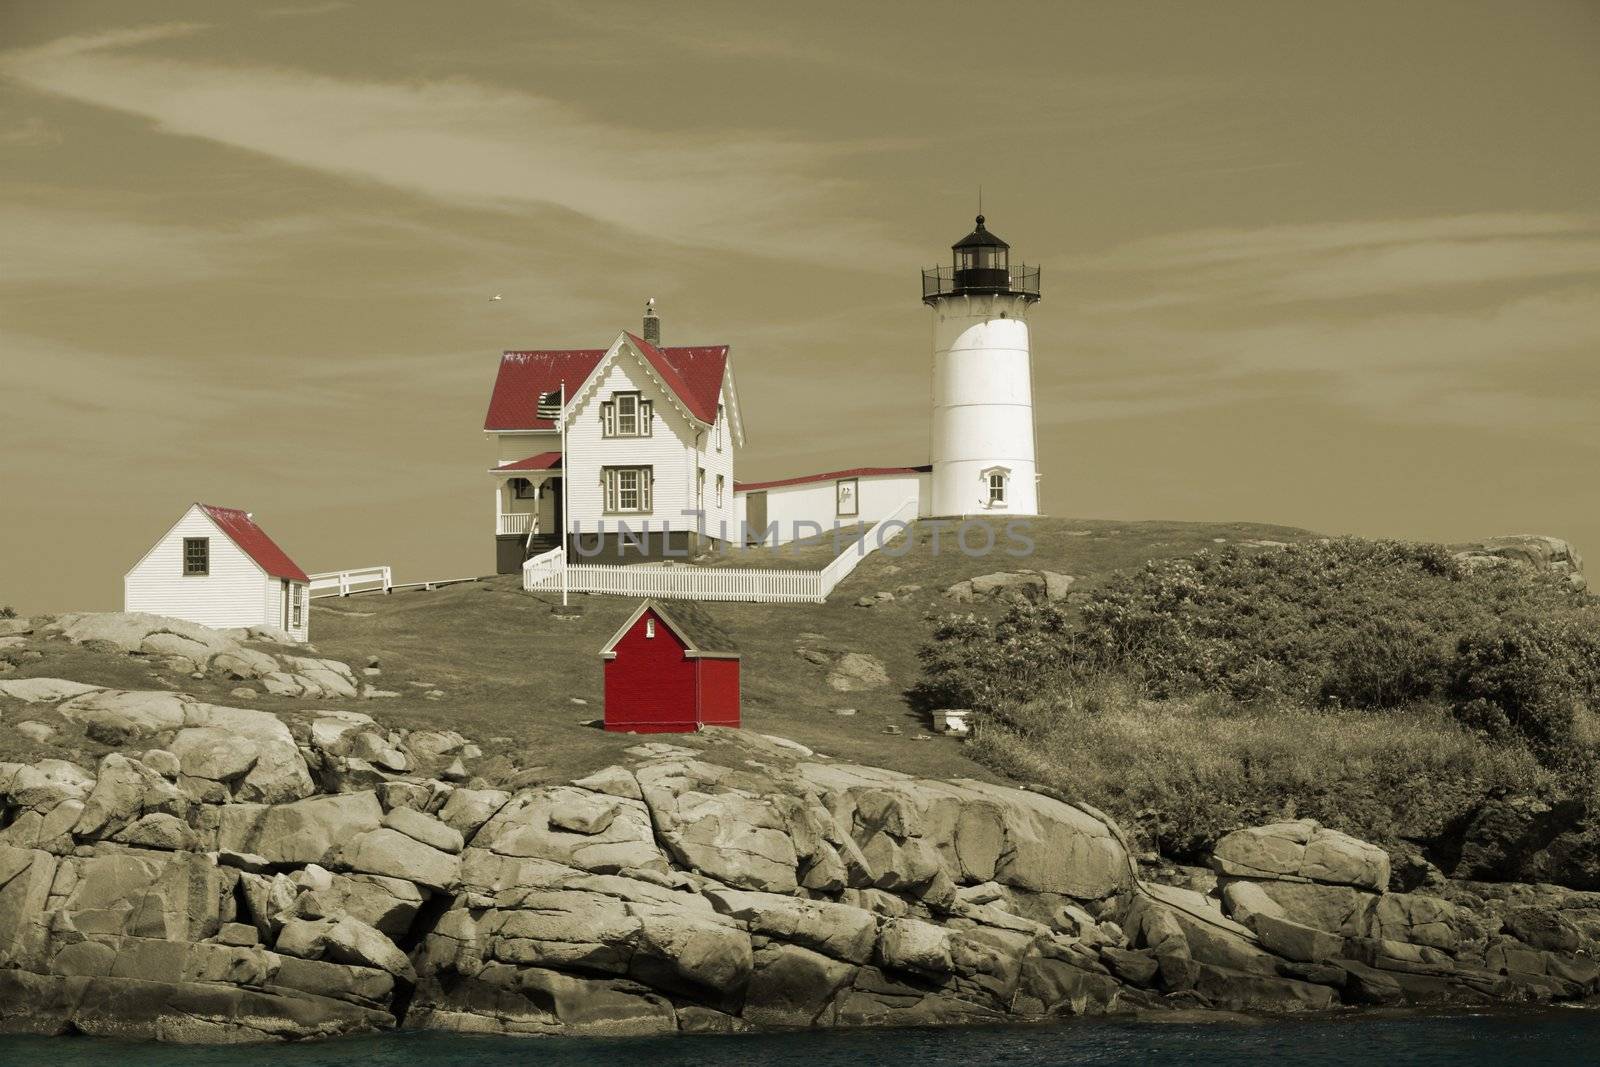 The Cape Neddick Nubble light house in Sepia and selective colors.